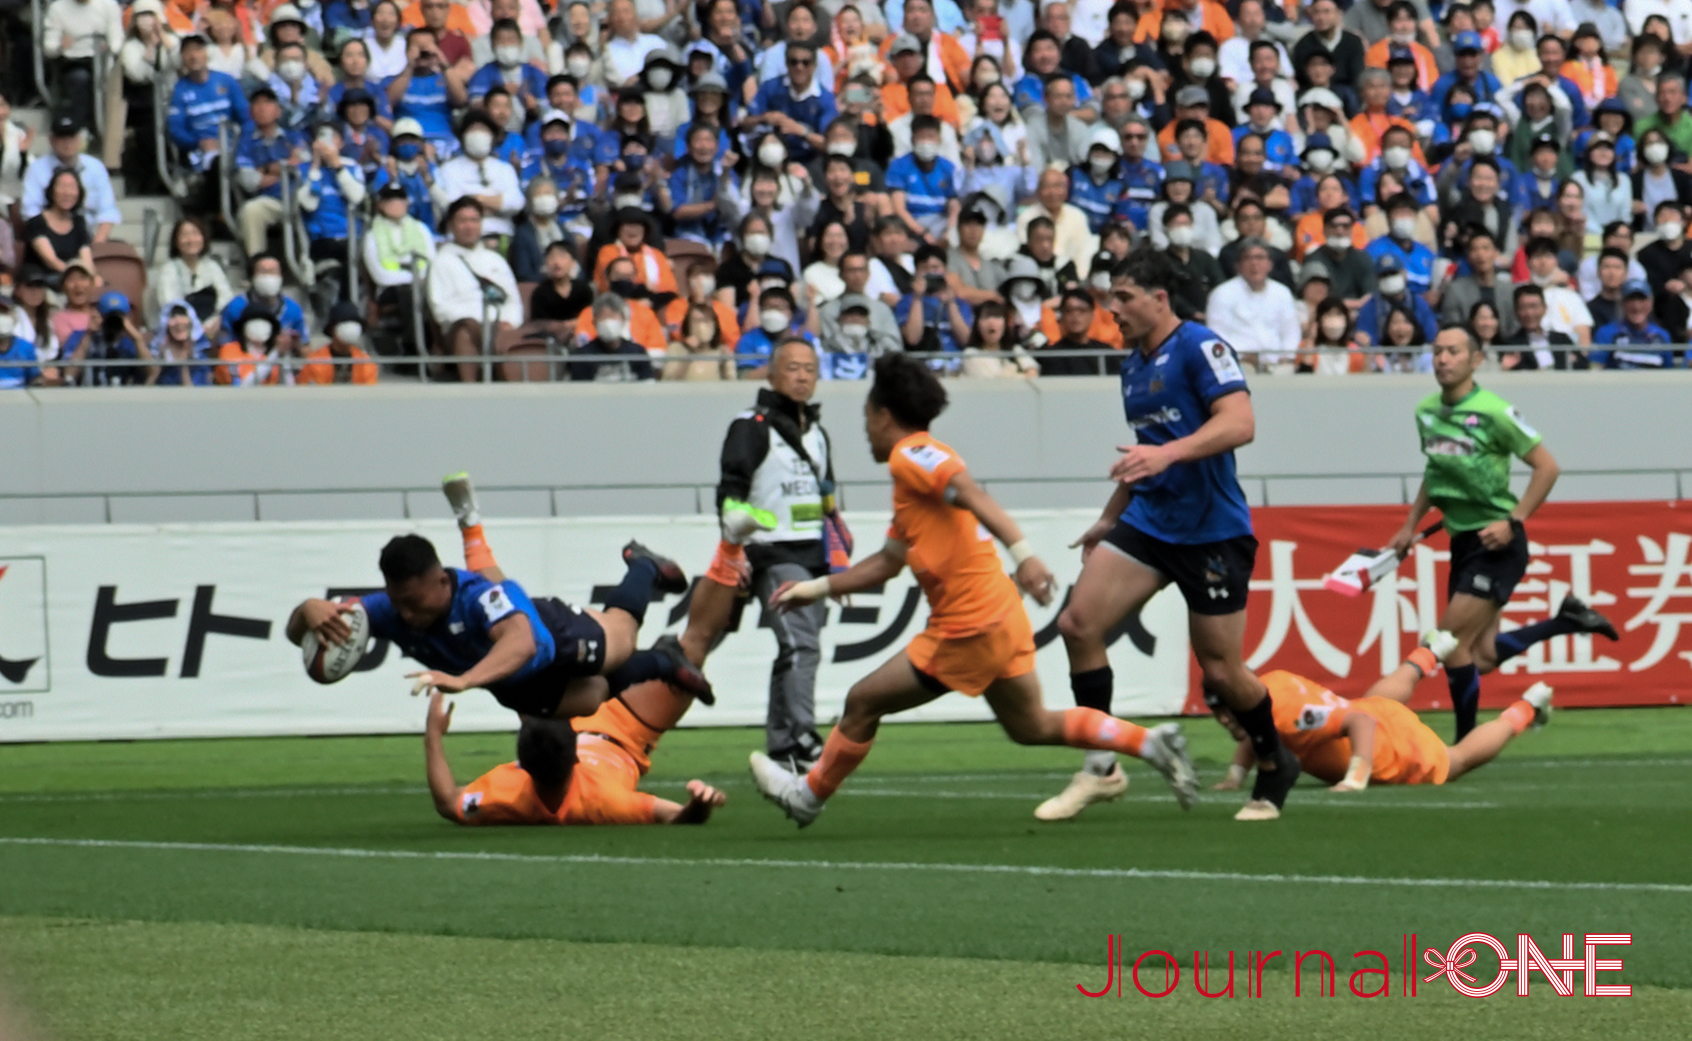 Japan Rugby League One final match, Tomoki Osada (Japan rugby union team) scored a try ; Photo by Journal-ONE